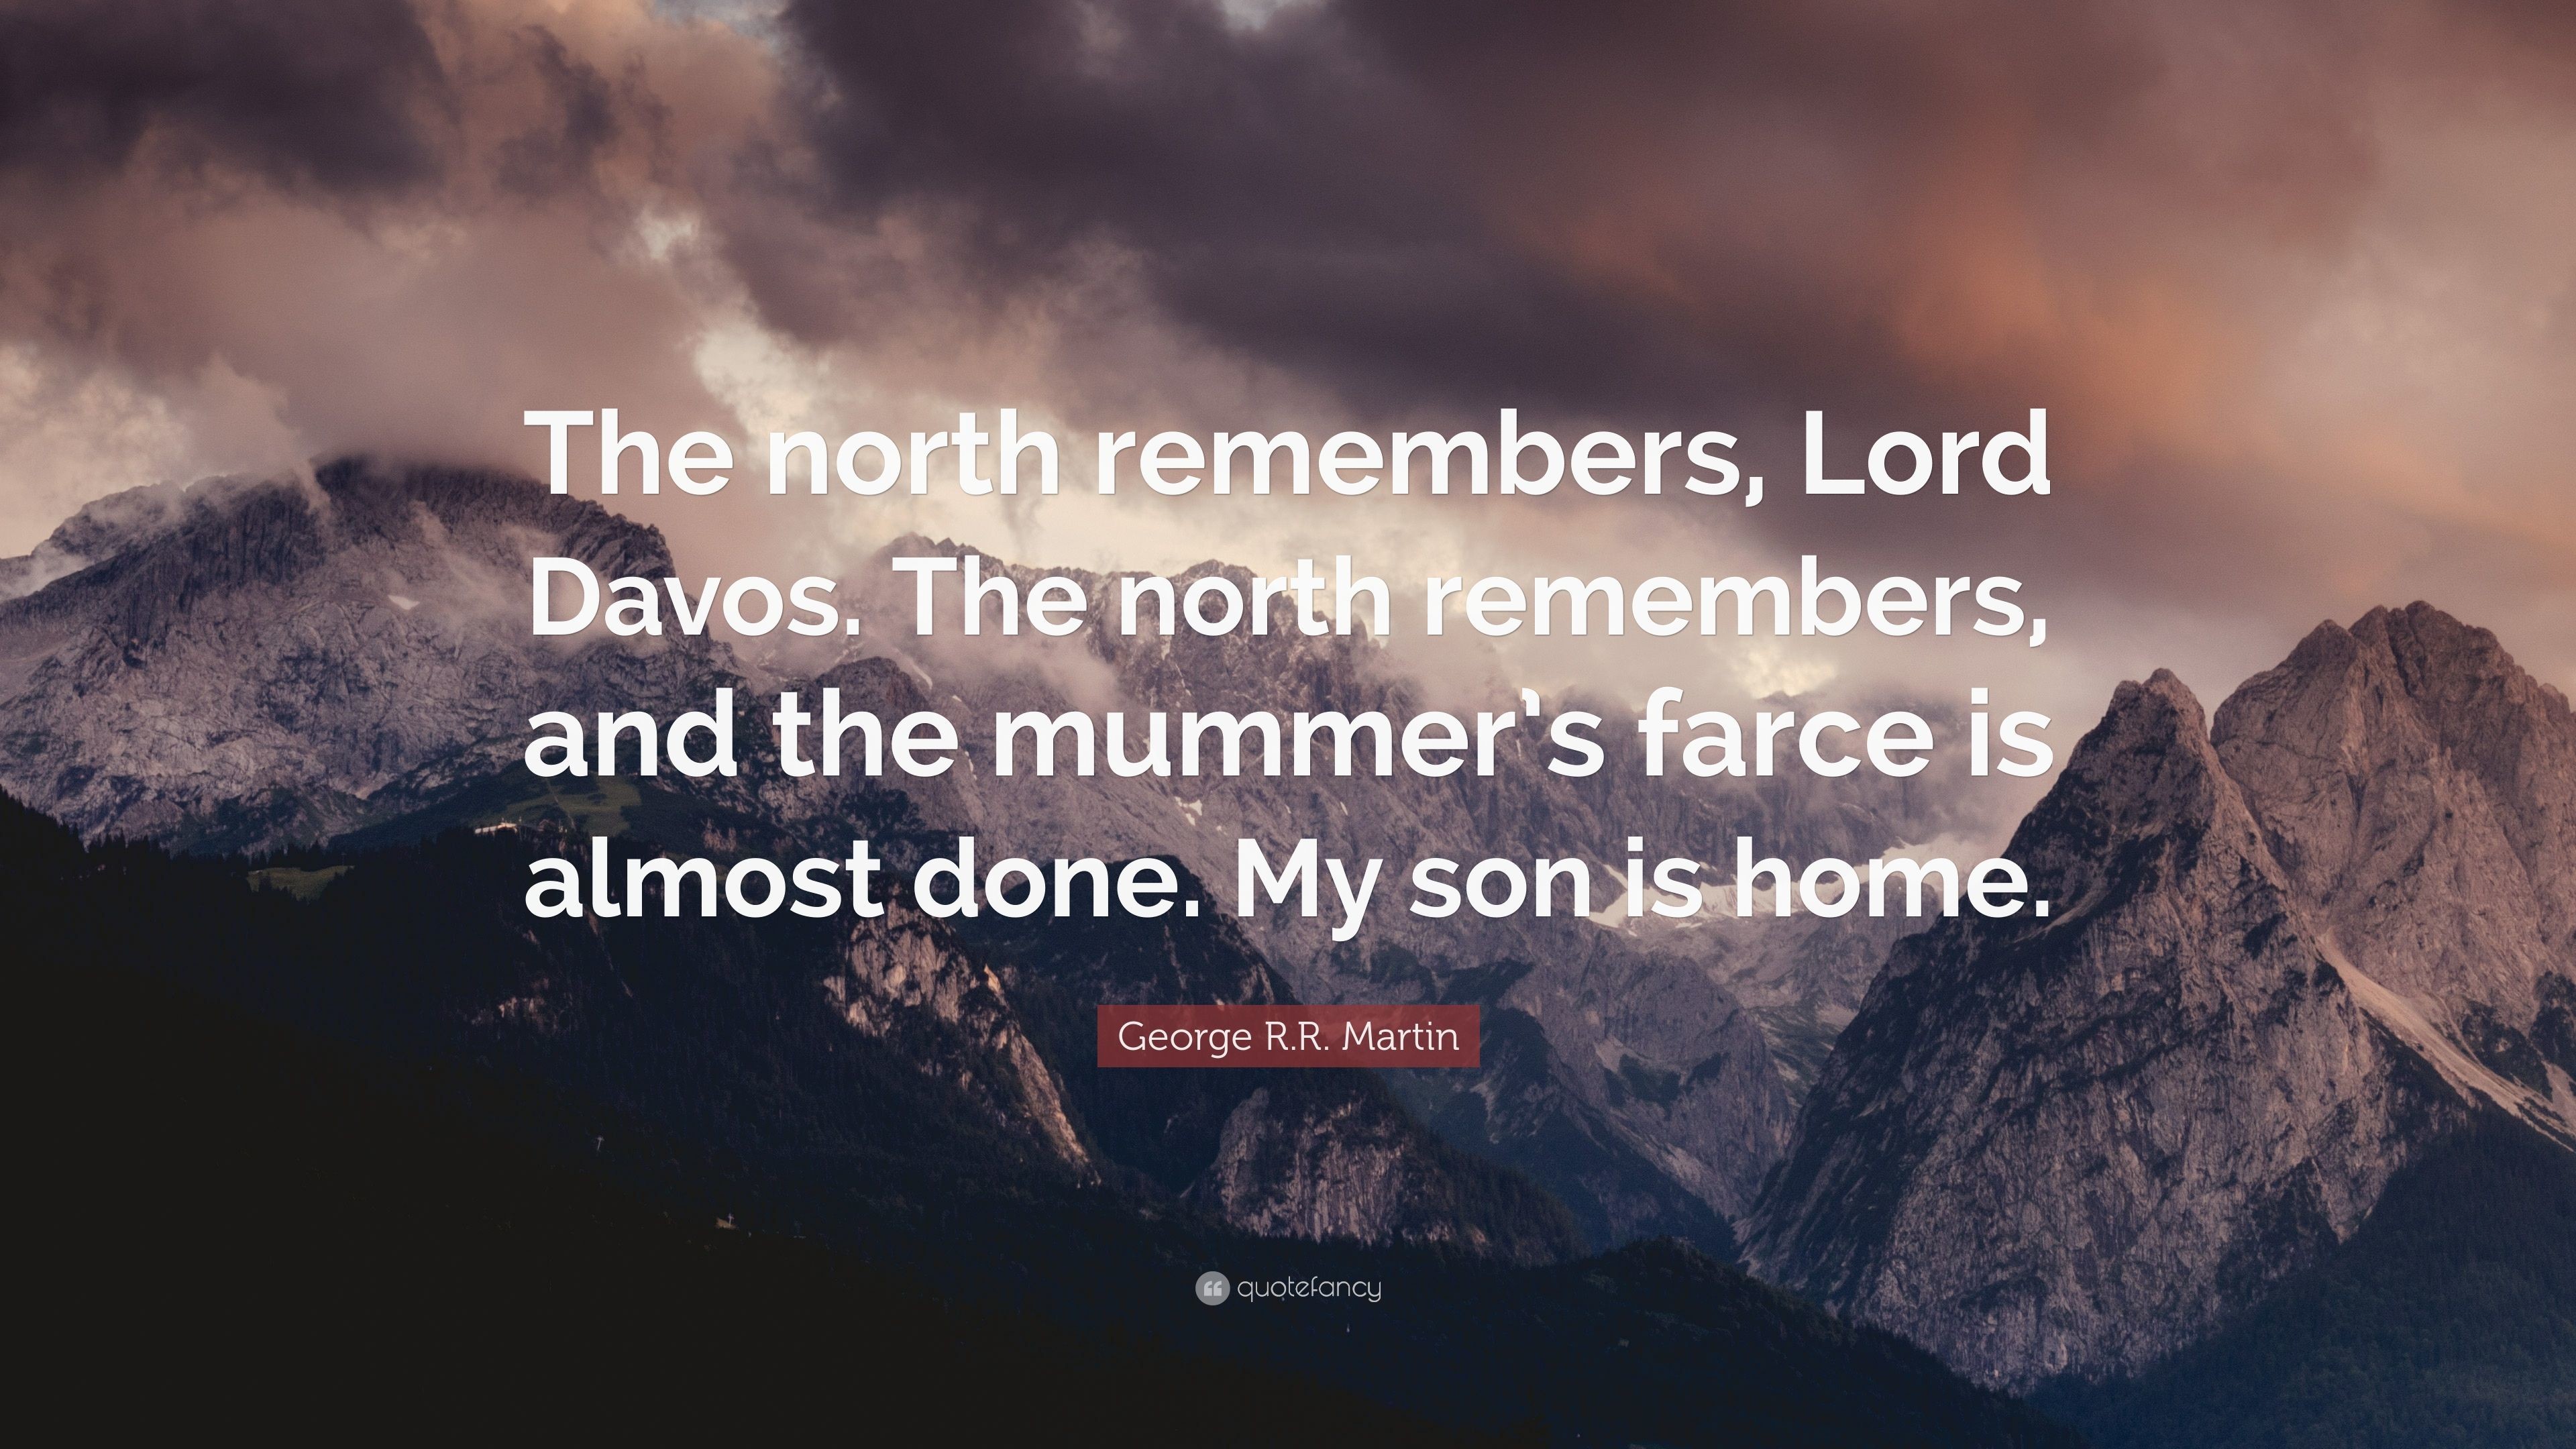 3840x2160 George R.R. Martin Quote: “The north remembers, Lord Davos. The north  remembers